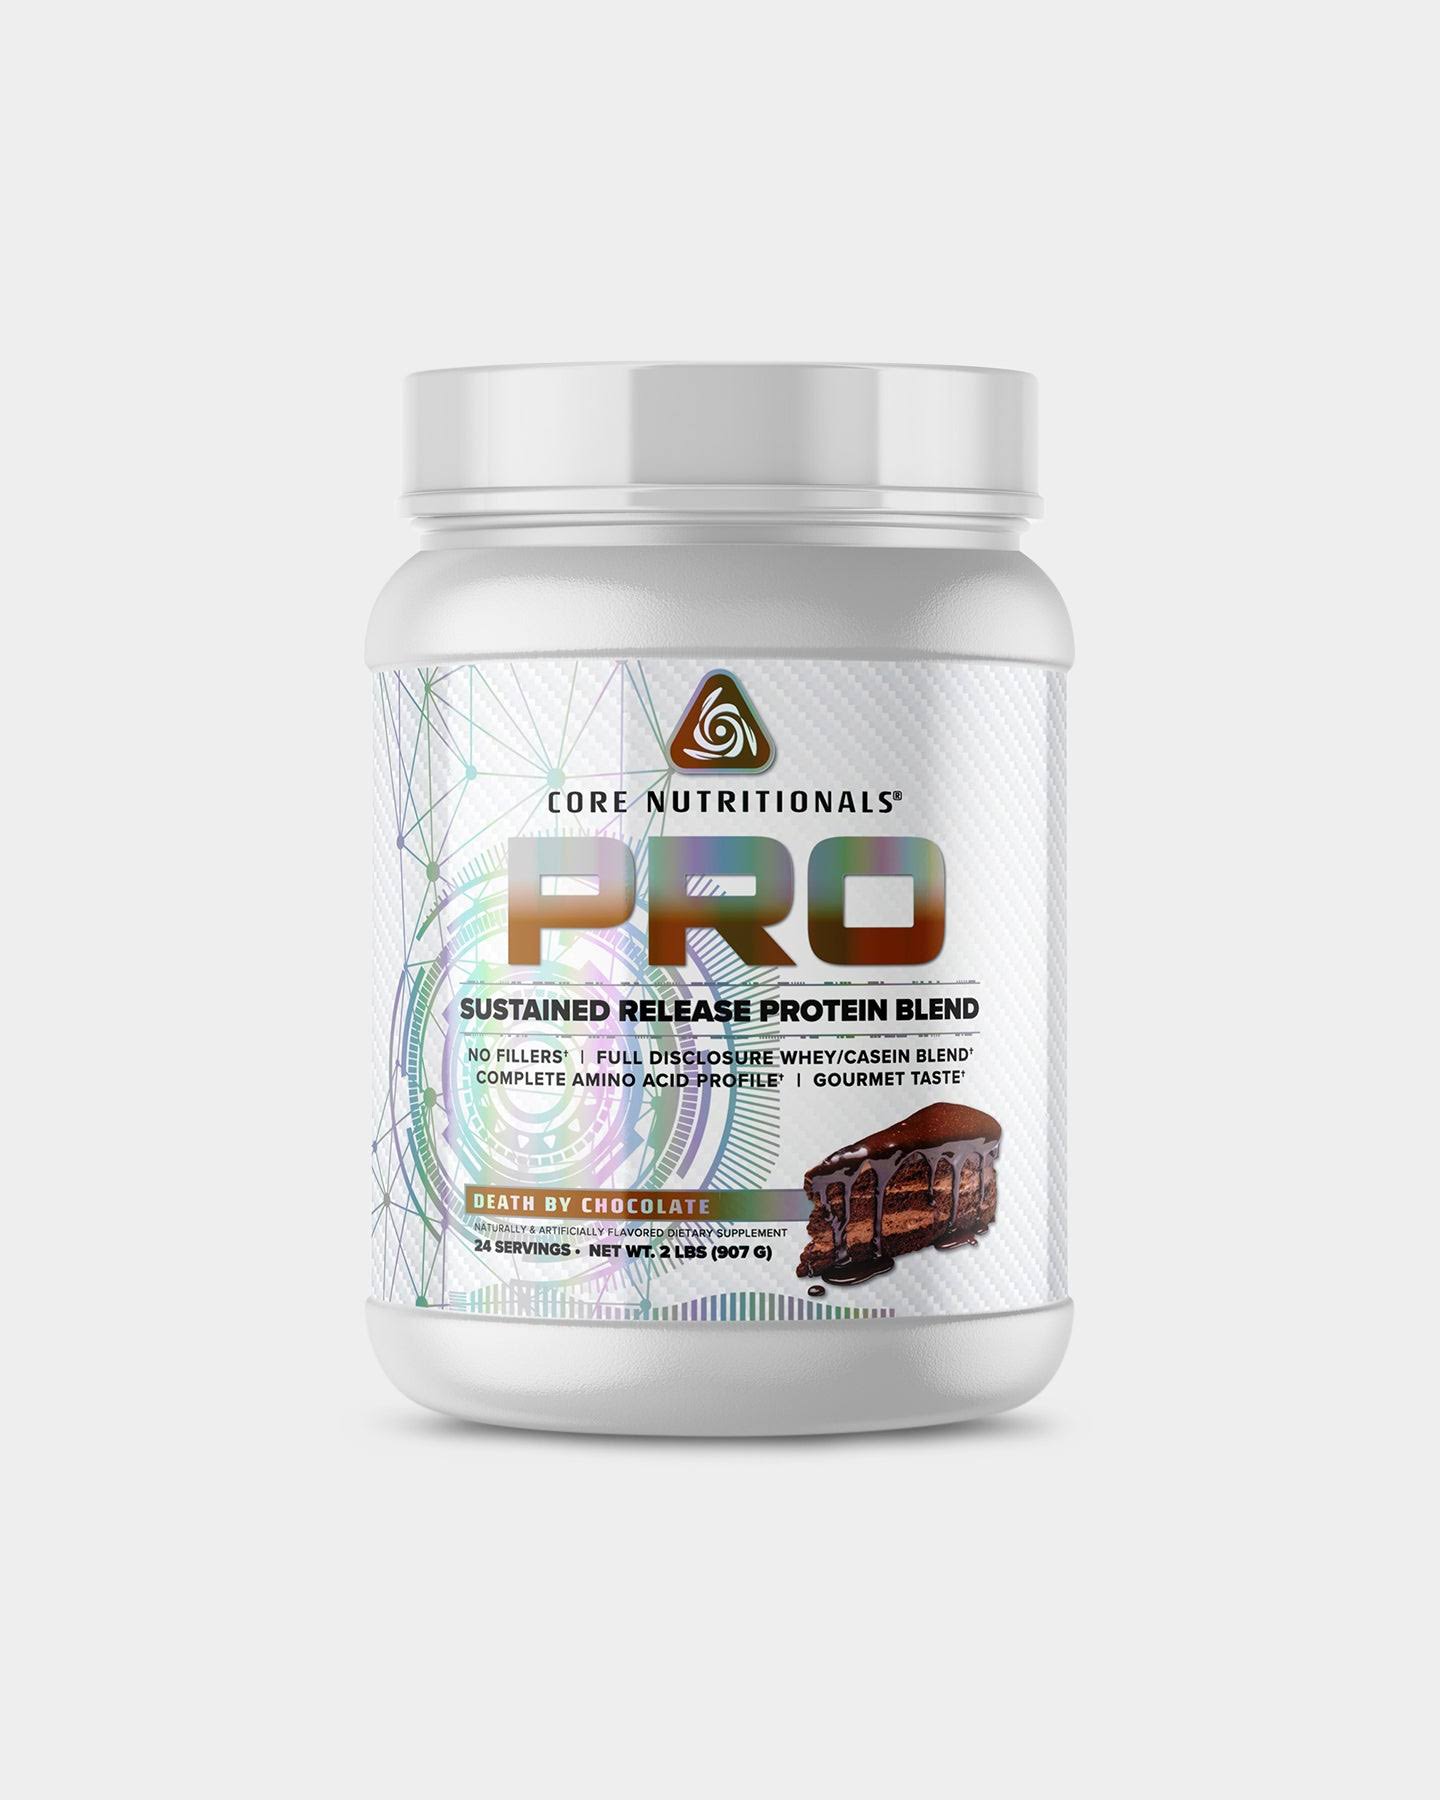 Core Nutritionals Pro Protein Death by Chocolate 2lb